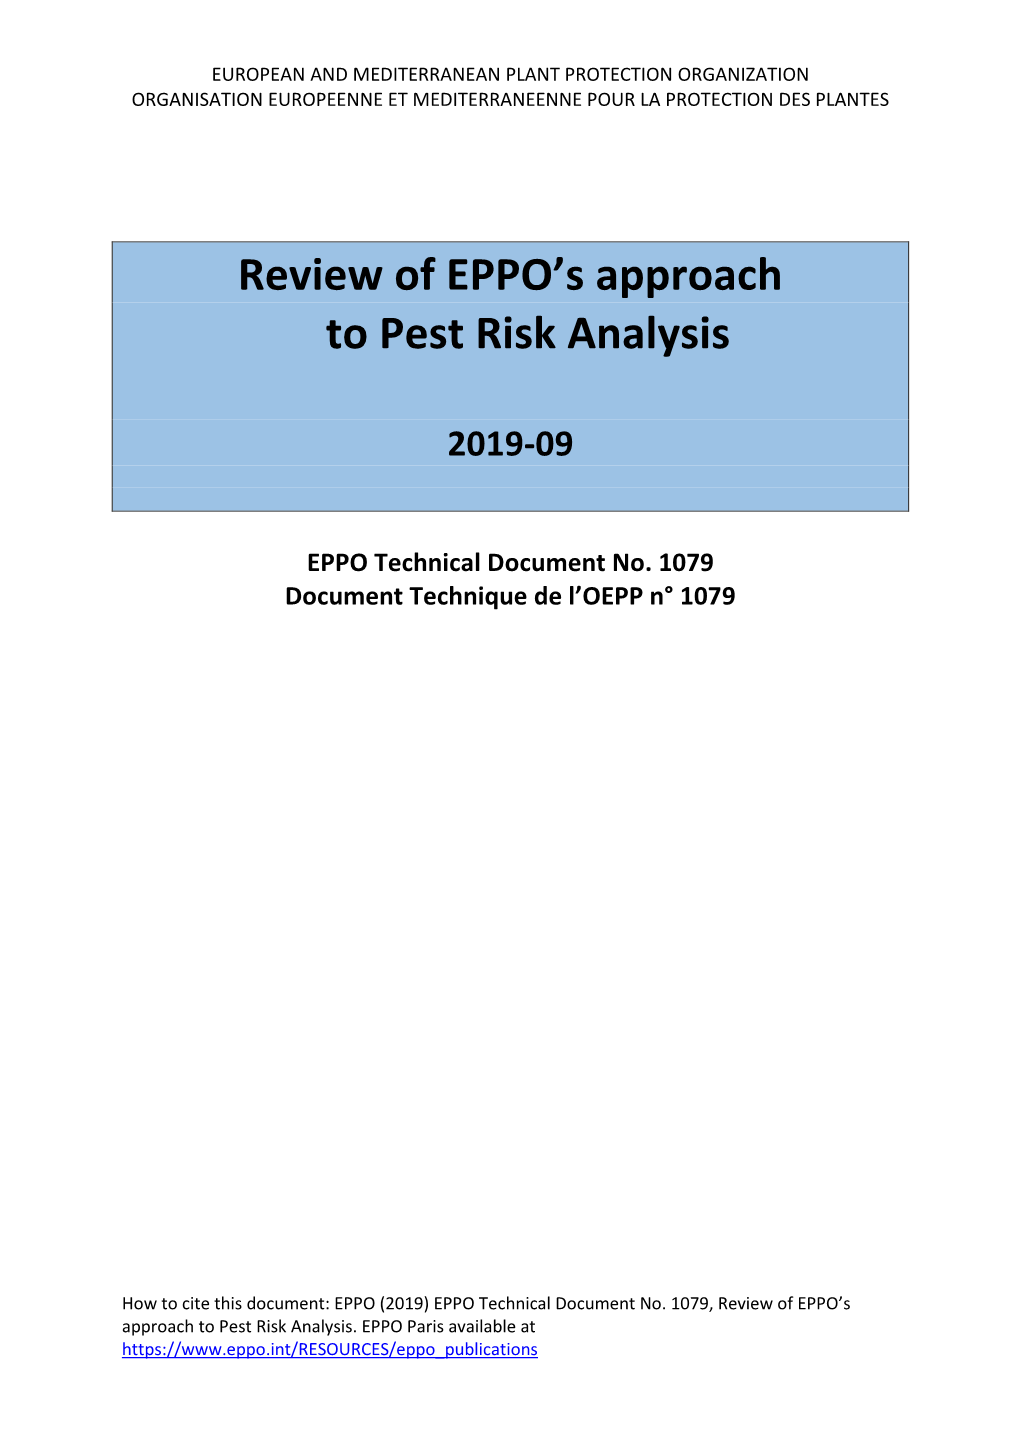 Review of EPPO's Approach to Pest Risk Analysis (No. 1079, 2019)